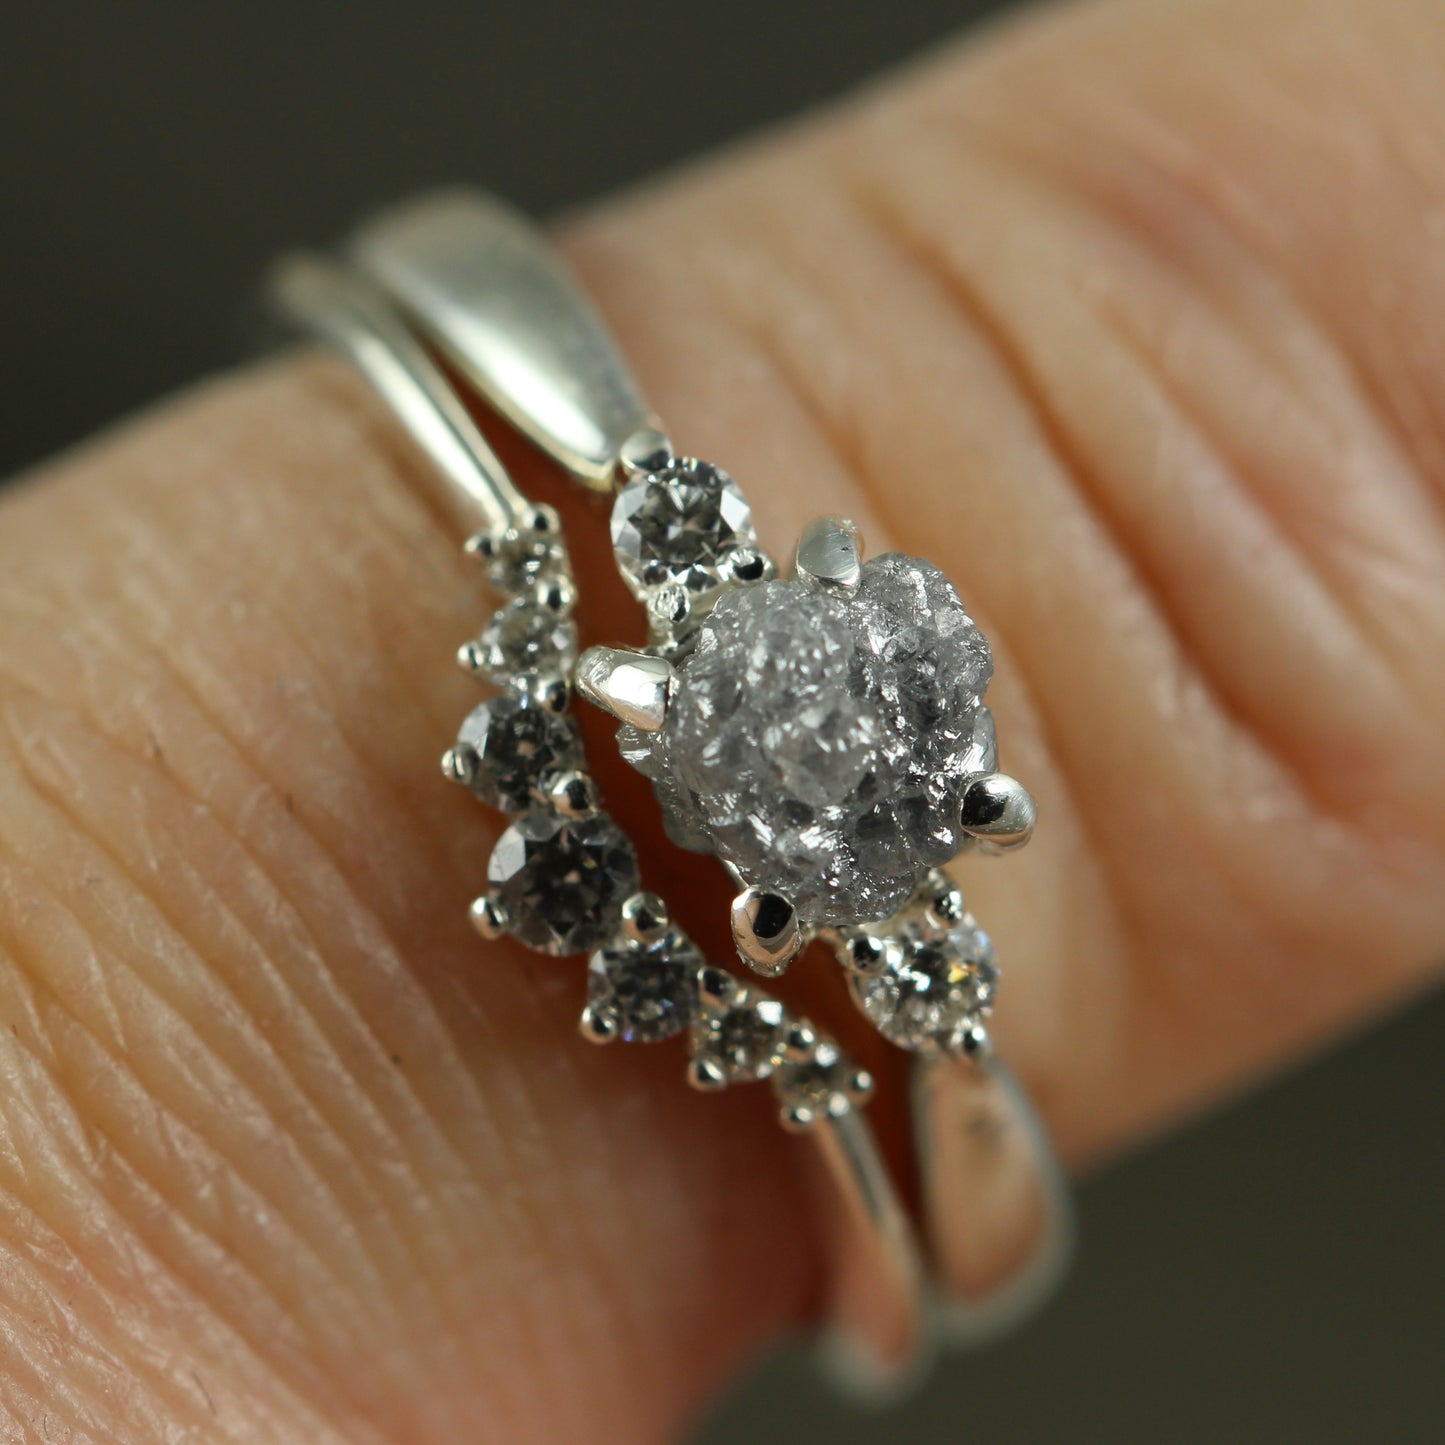 Salt & Pepper Rough Uncut Diamond Ring with Faceted Diamond Accents